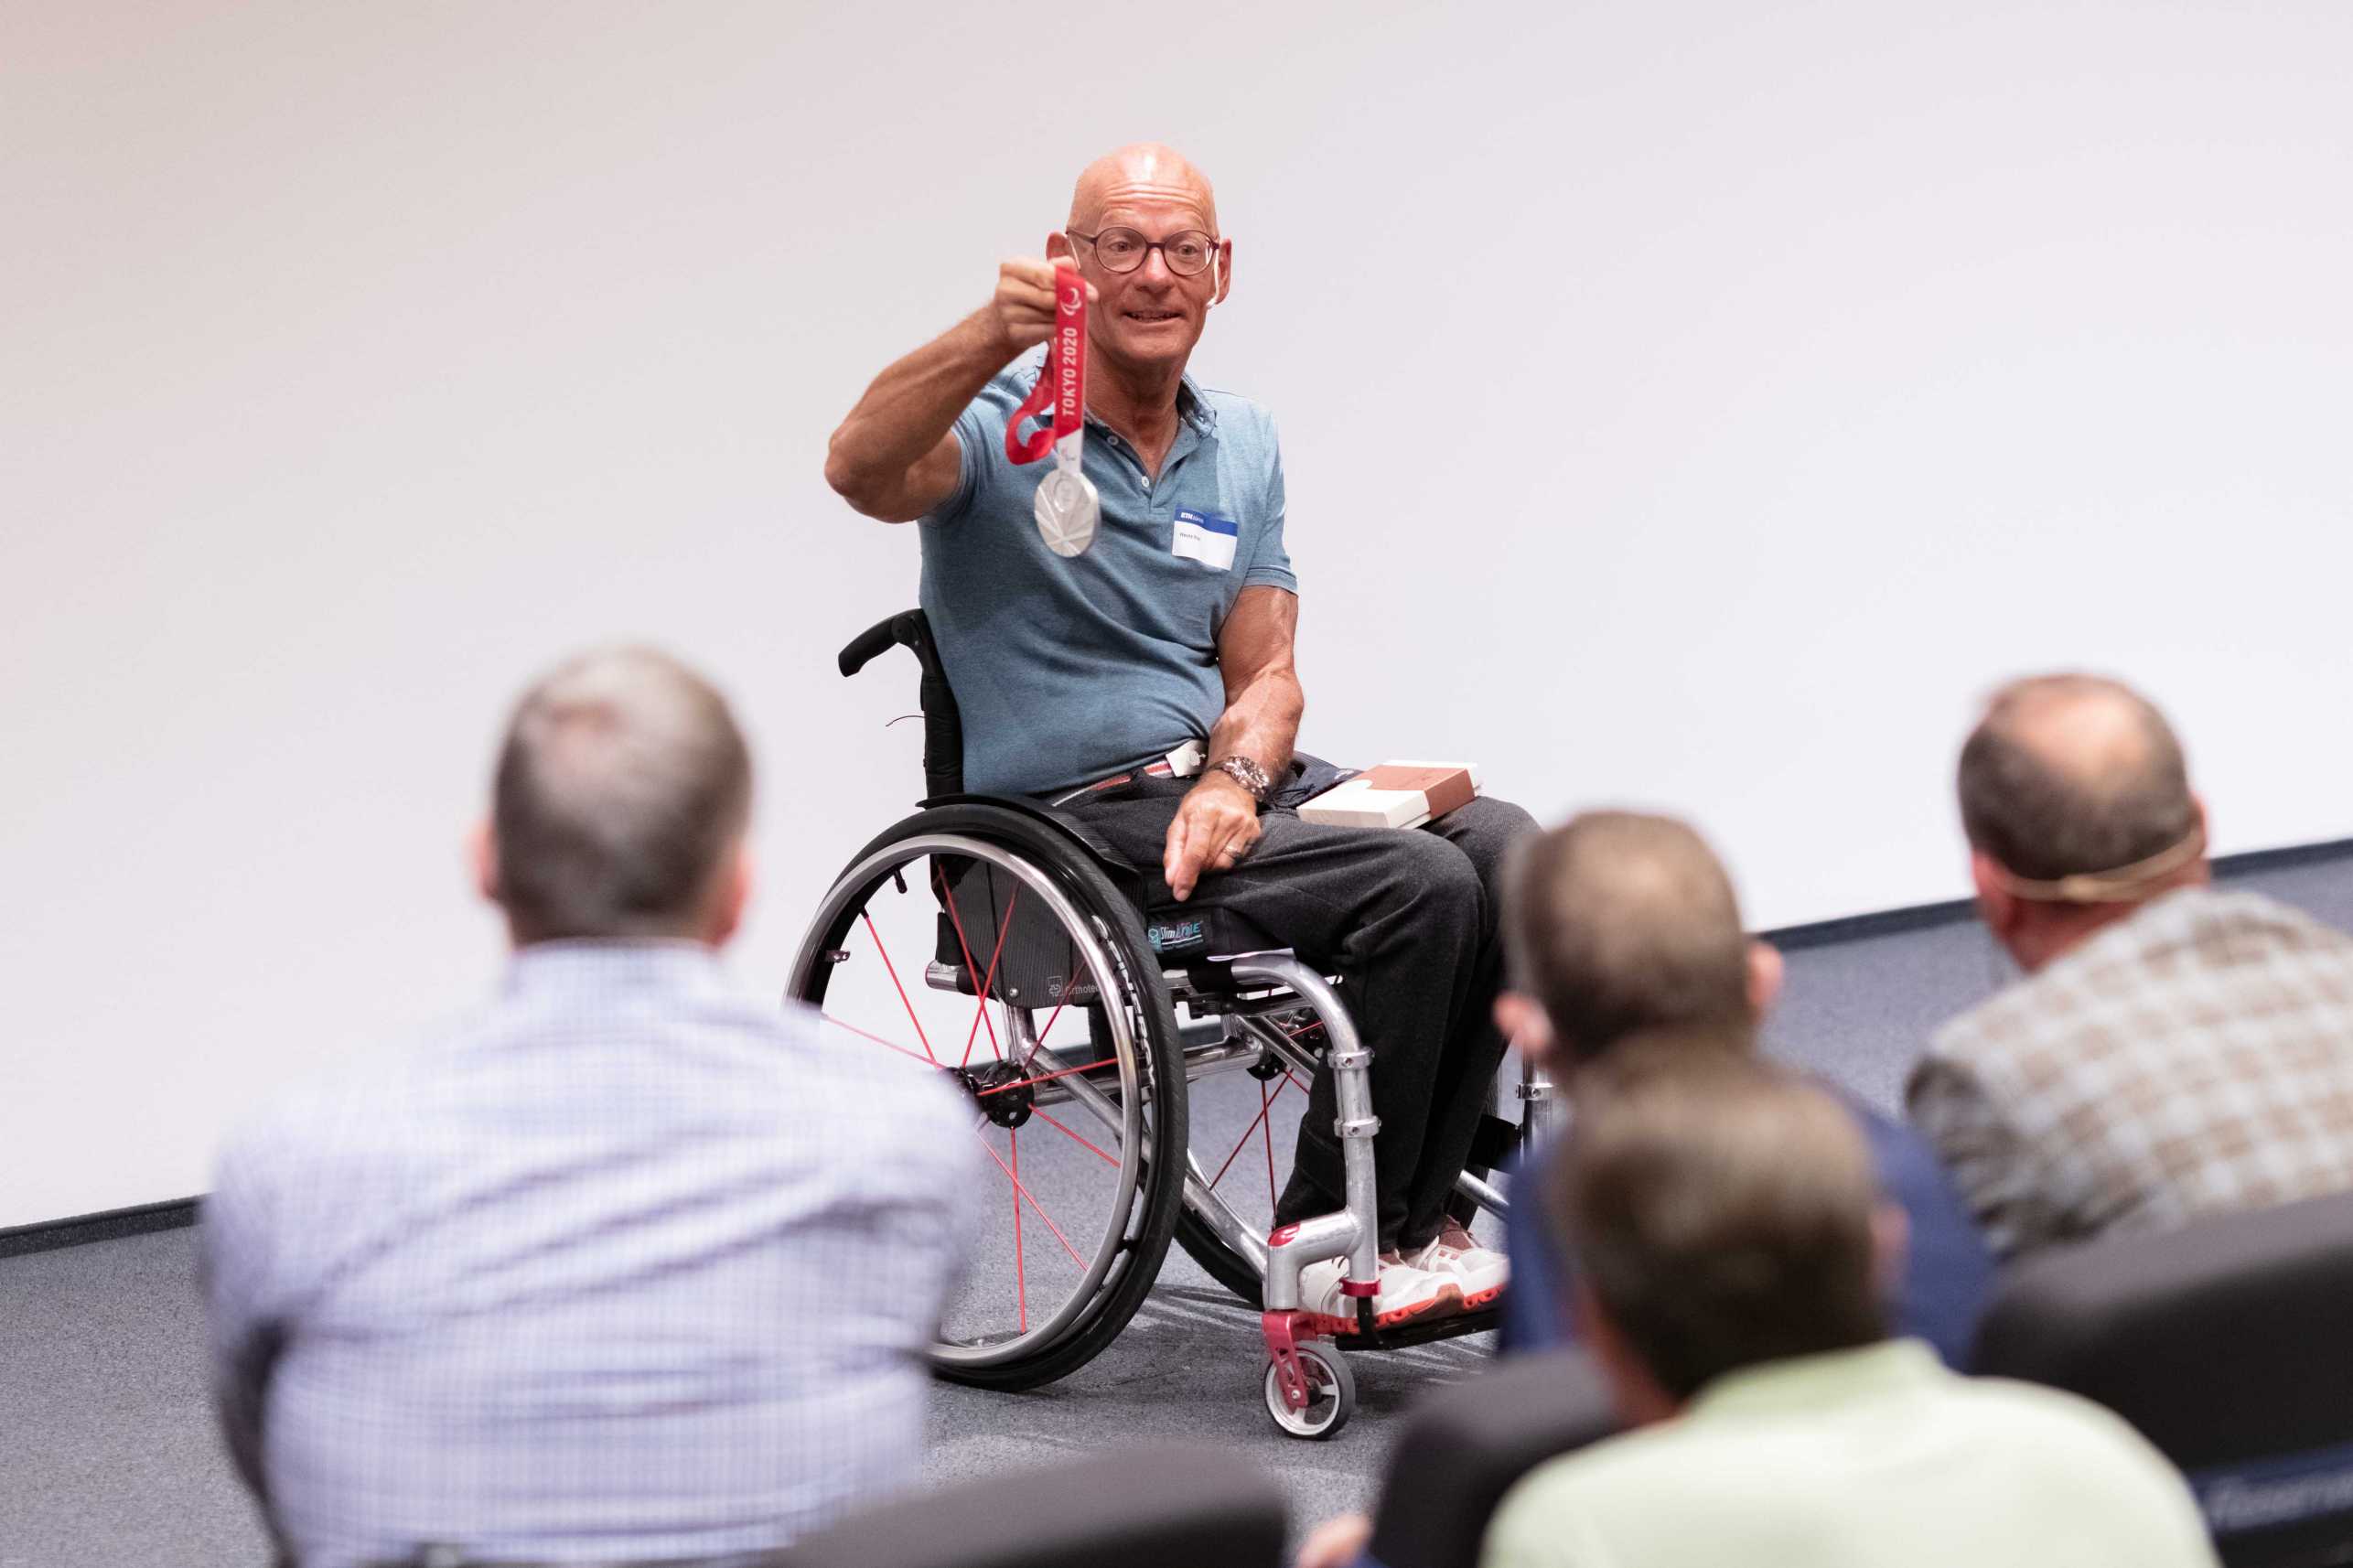 Paralympic Gold Medallist and World Champion Heinz Frei shows Olympic medal to the public